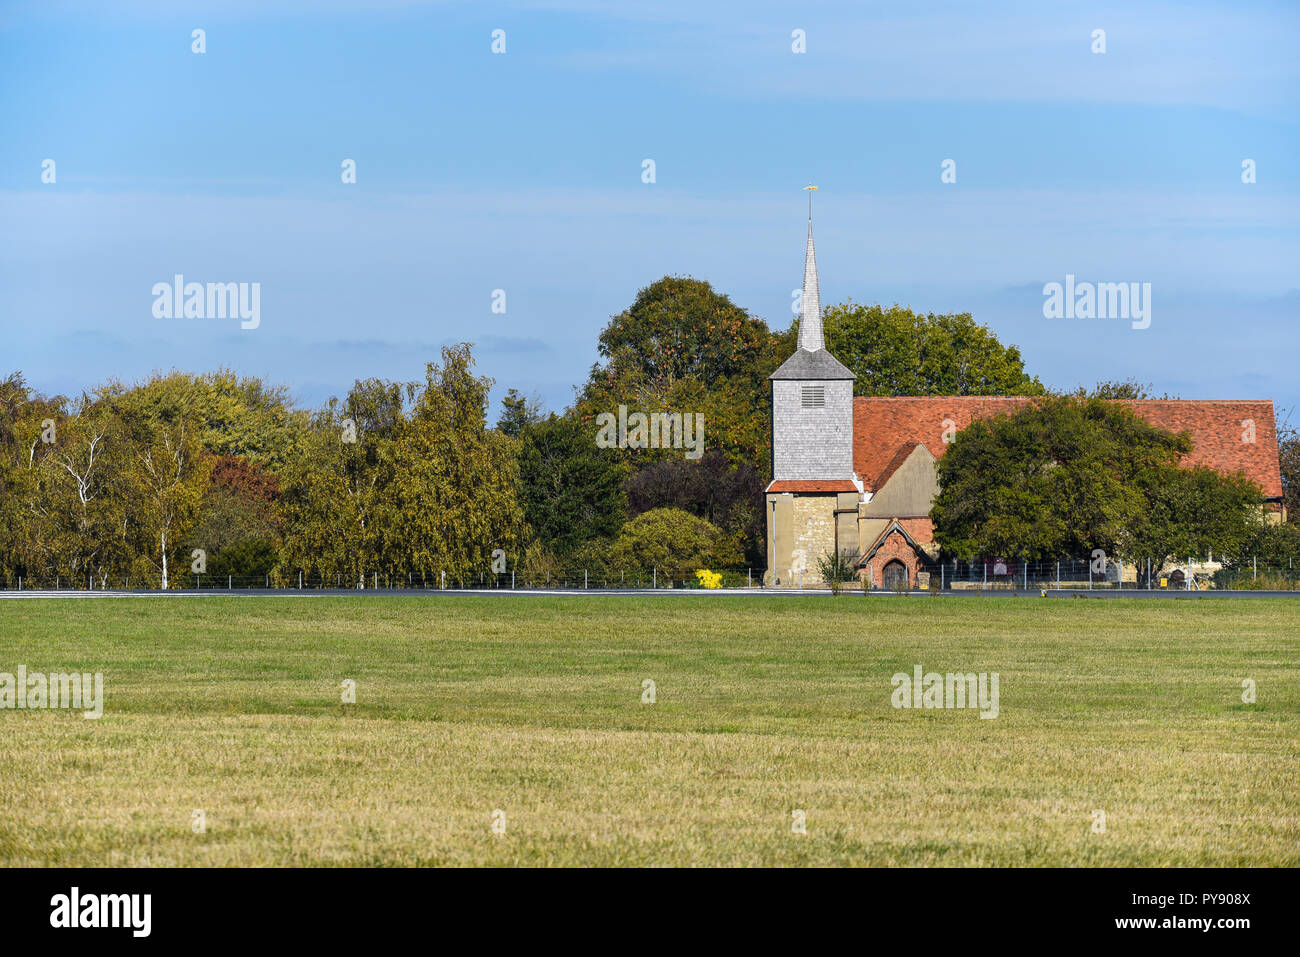 St Laurence and All Saints church on the edge of the runway at London Southend Airport, Eastwood, Essex, UK. Space for copy Stock Photo